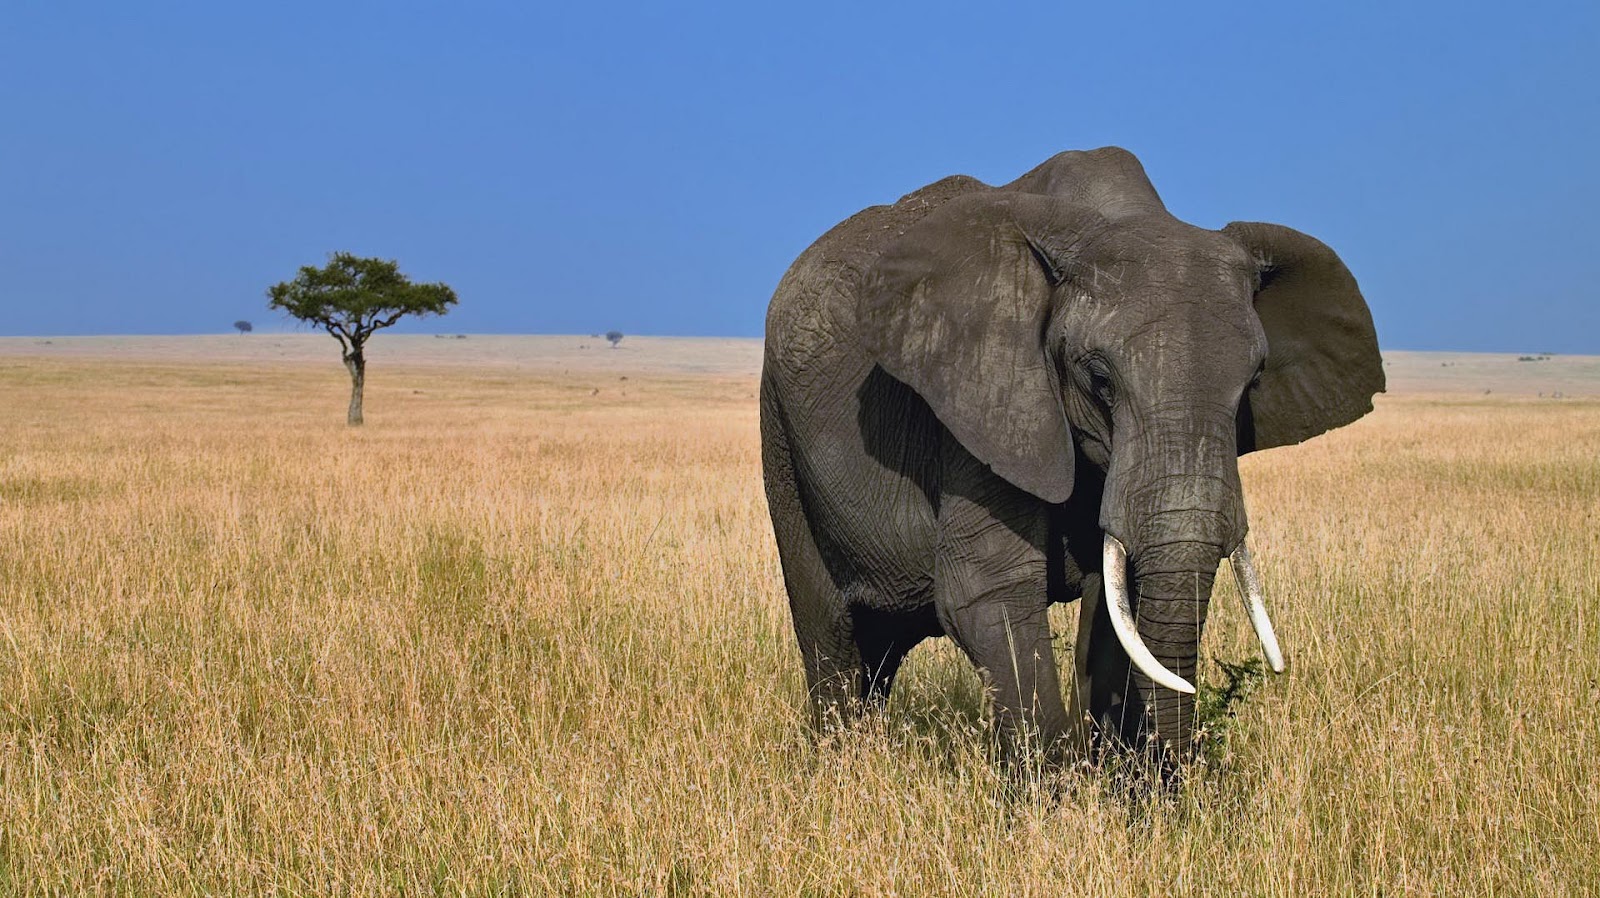 HD Animal Wallpaper With A Big Elephant In The Wild